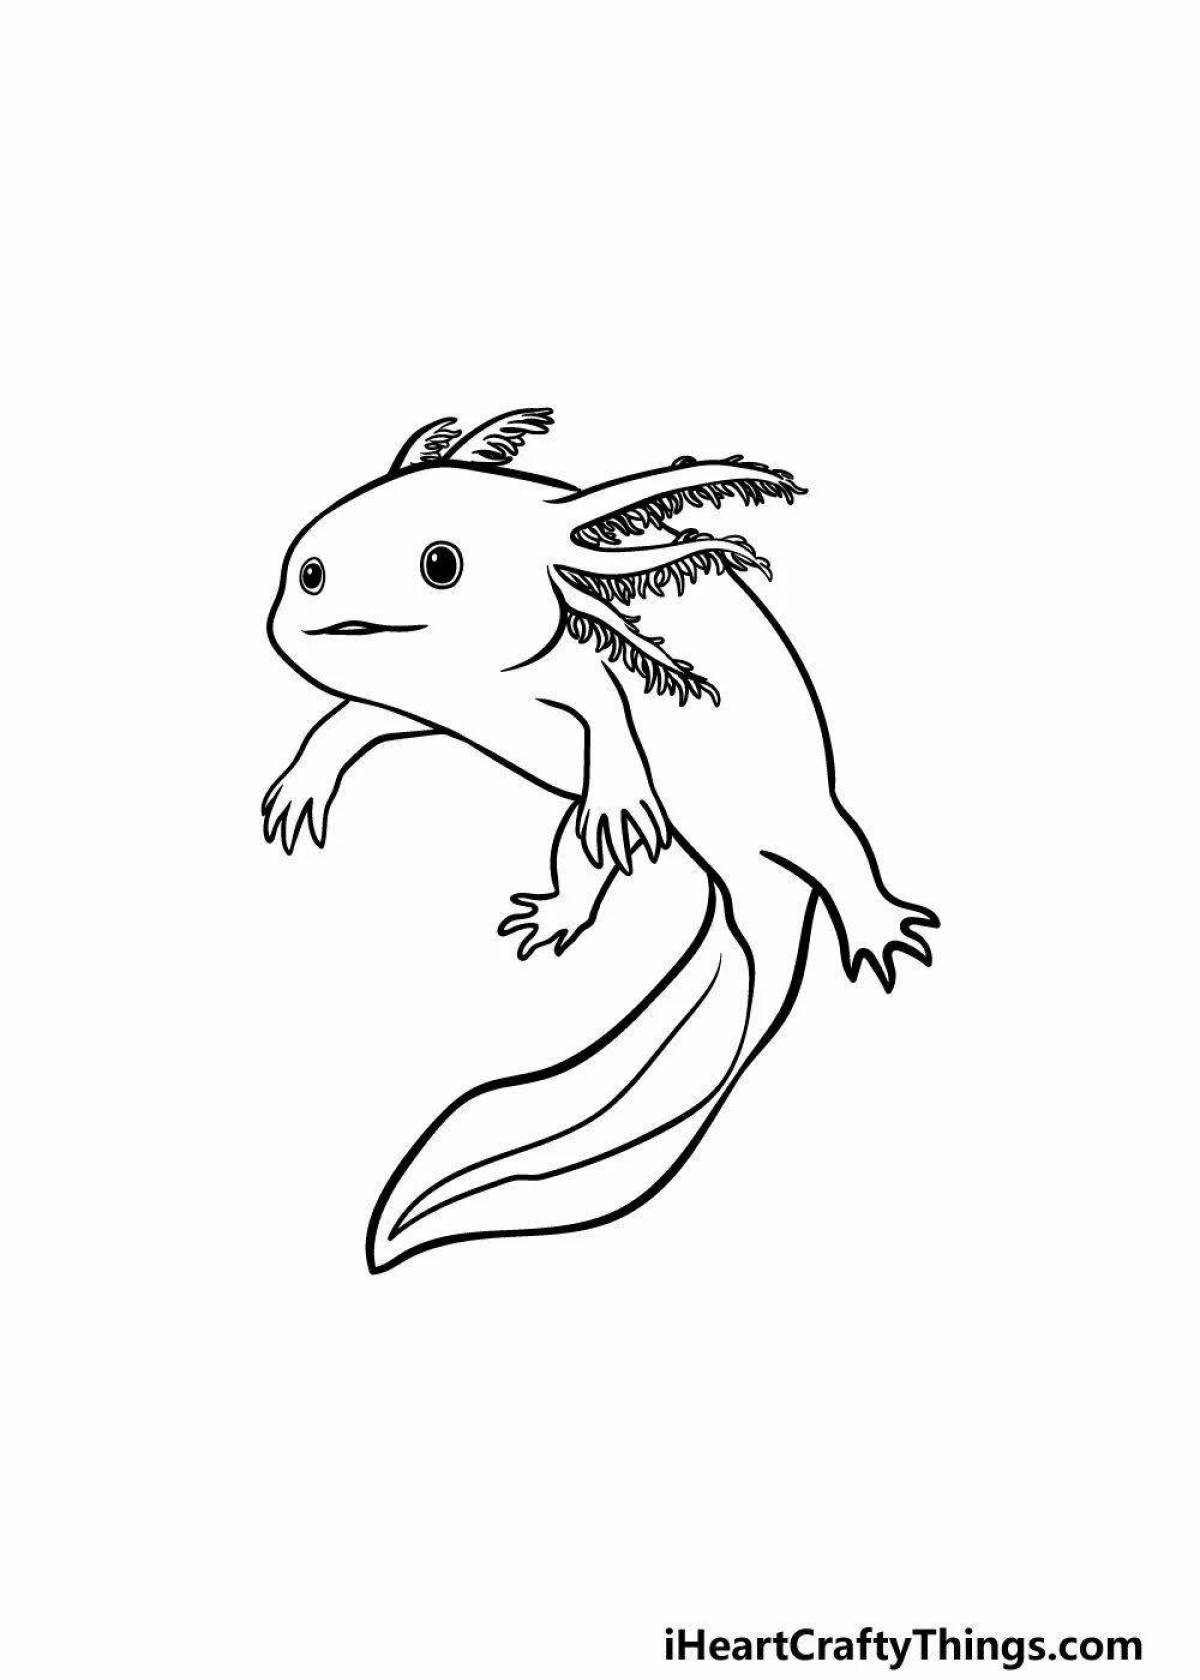 Wonderful axolotl coloring from minecraft